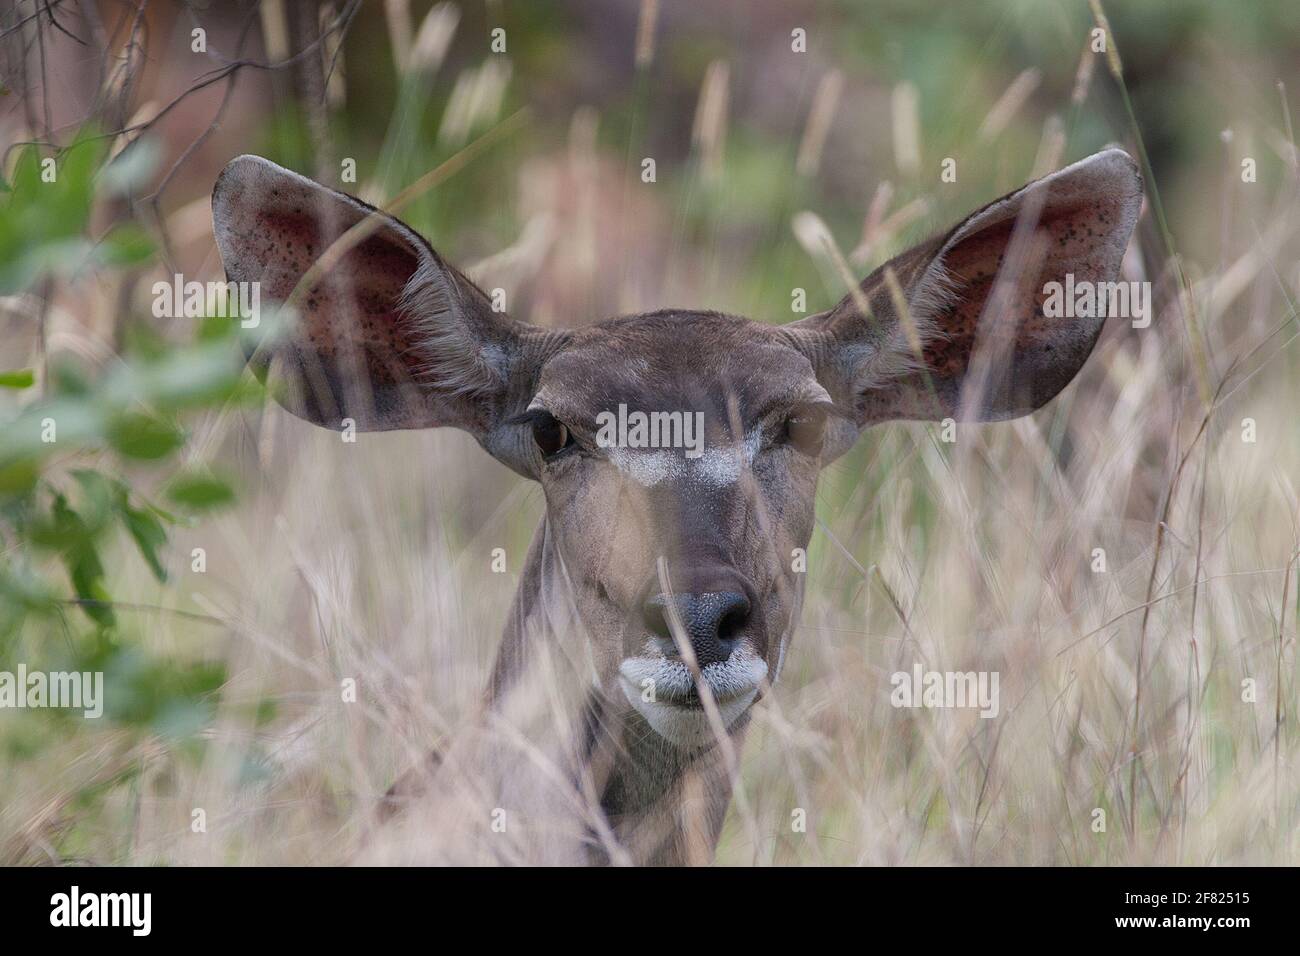 Looking snazzy in his makeup - a female Waterbuck peering through the grass Stock Photo